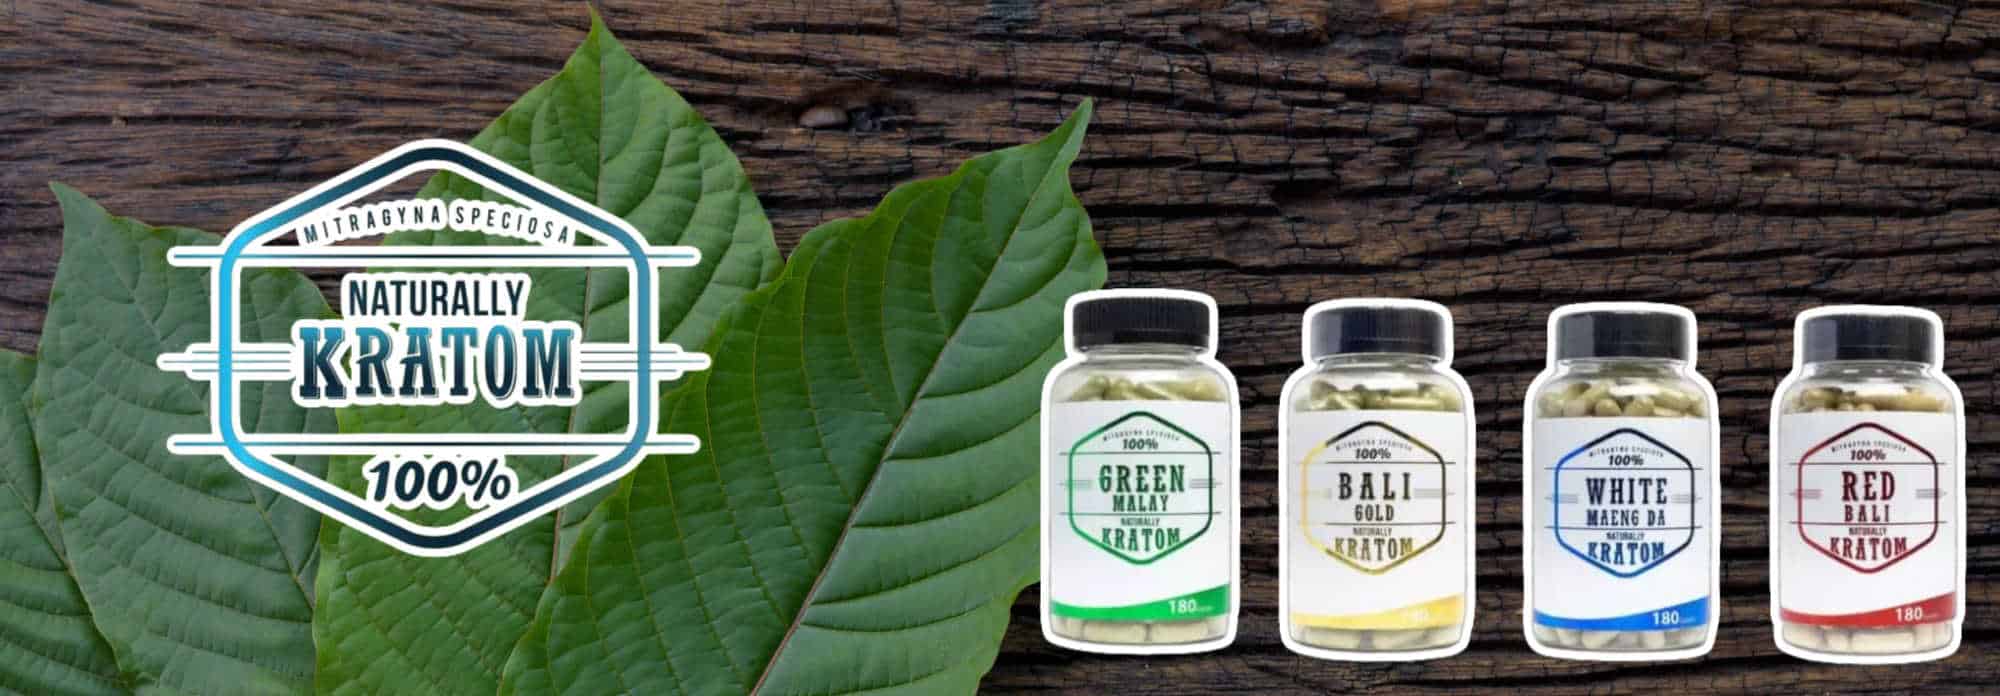 image of naturally kratom products